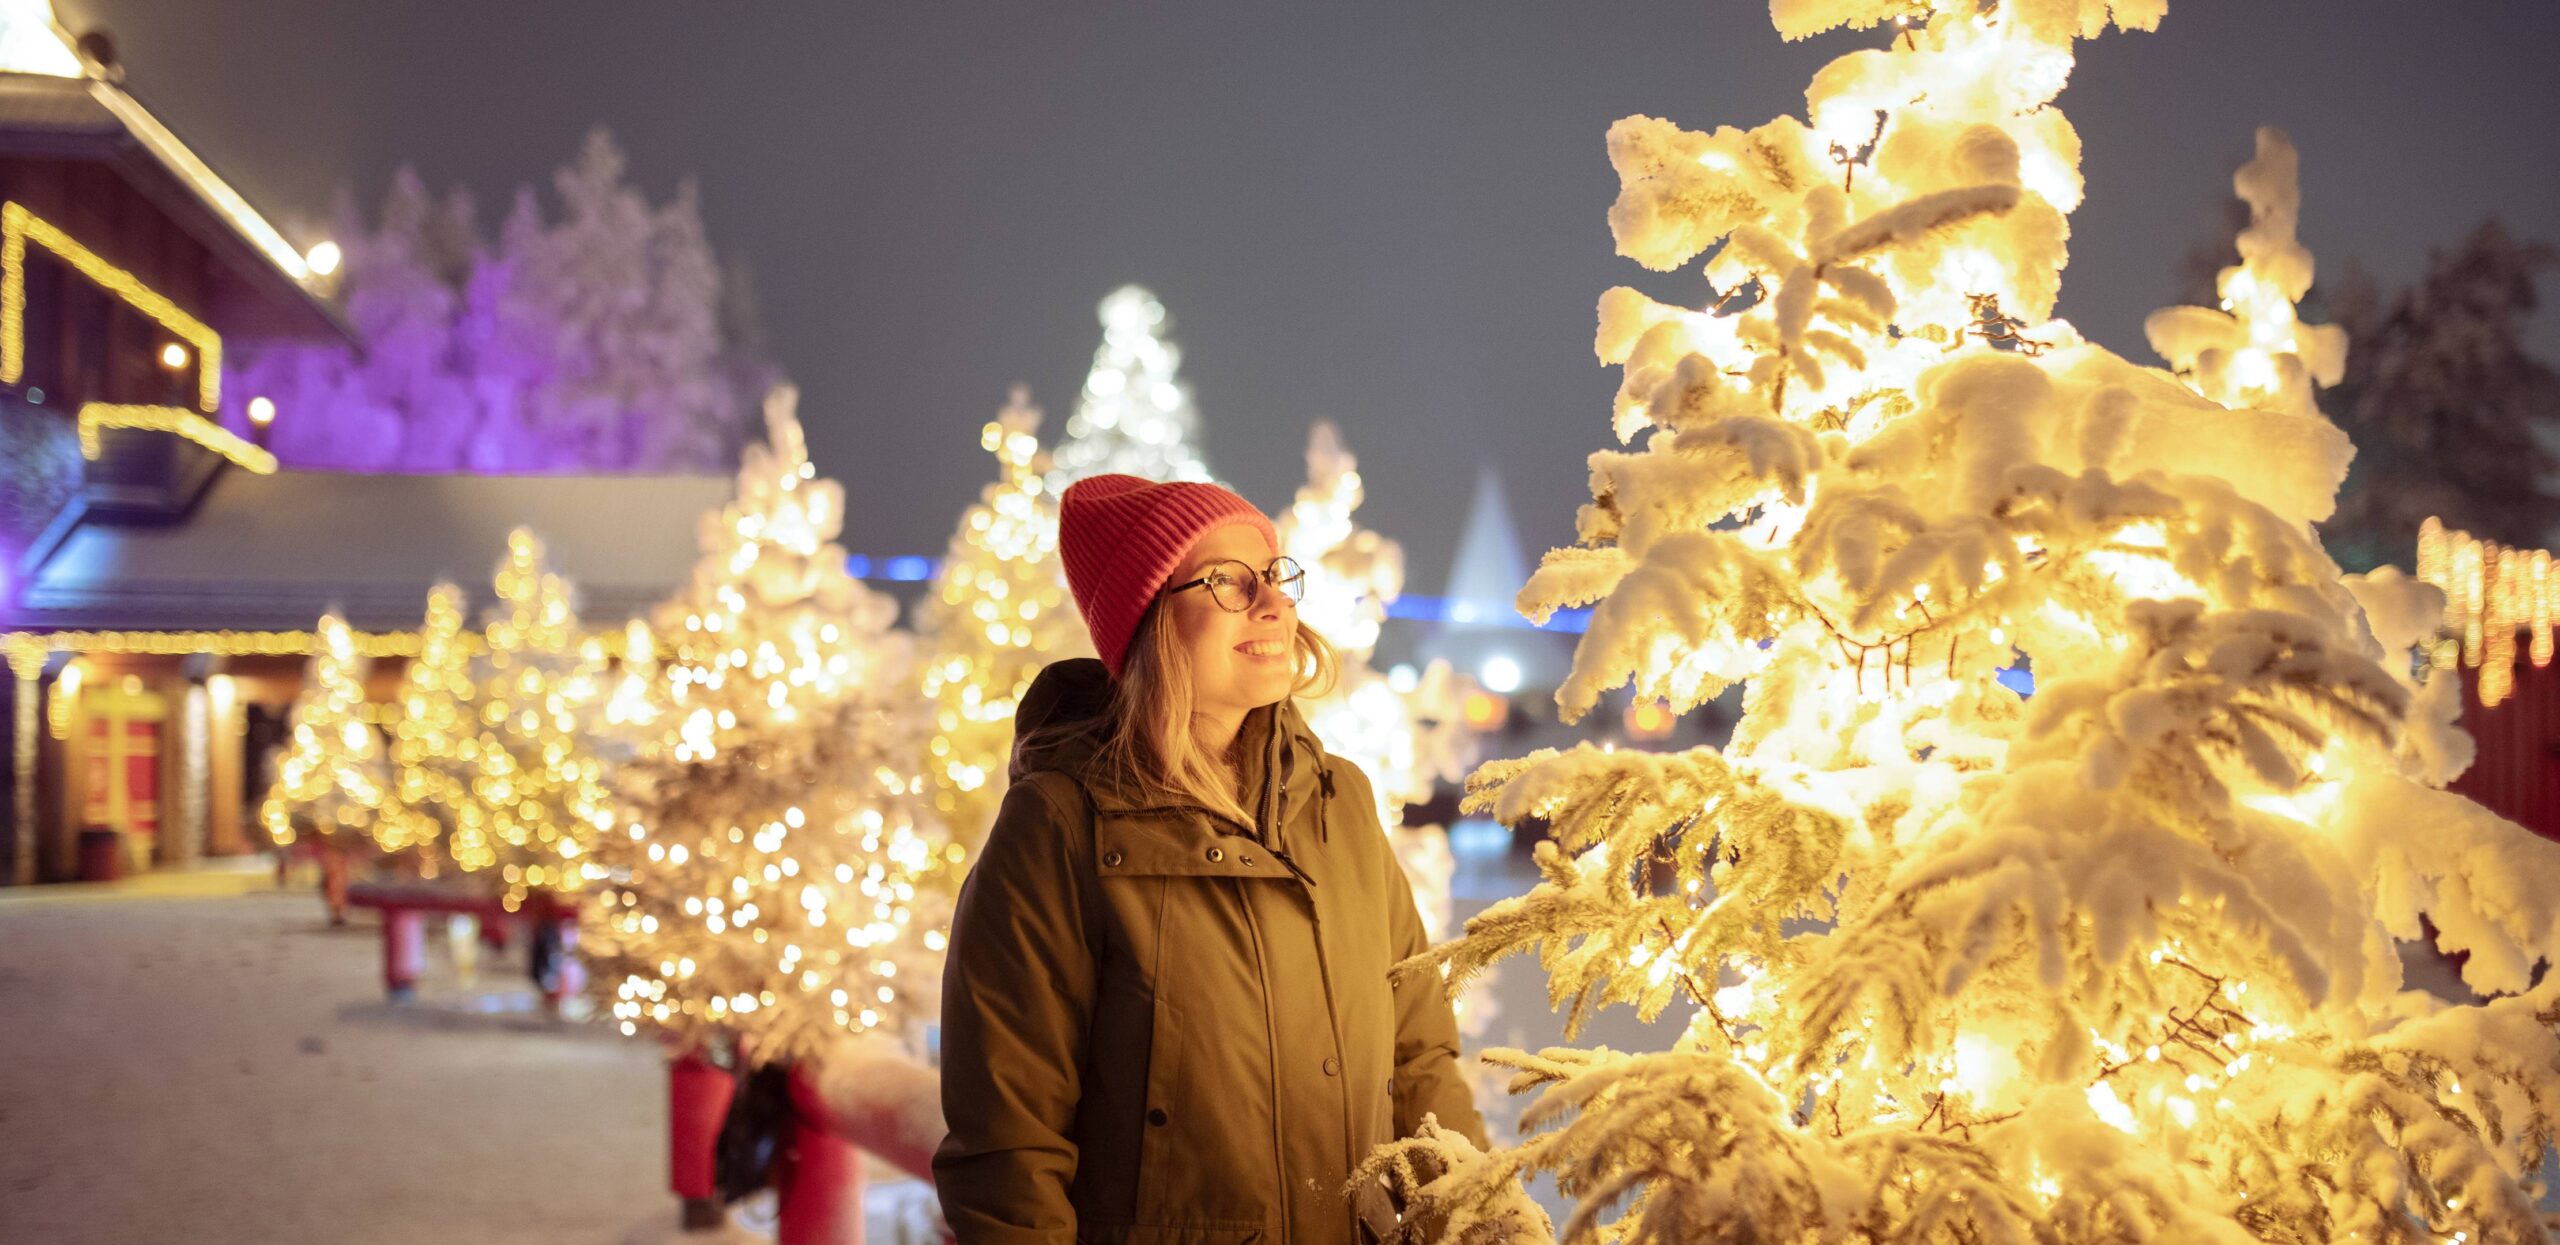 A young woman bundled up in winter clothes, smiling and admiring white holiday lights on evergreen trees leading up to a festive house